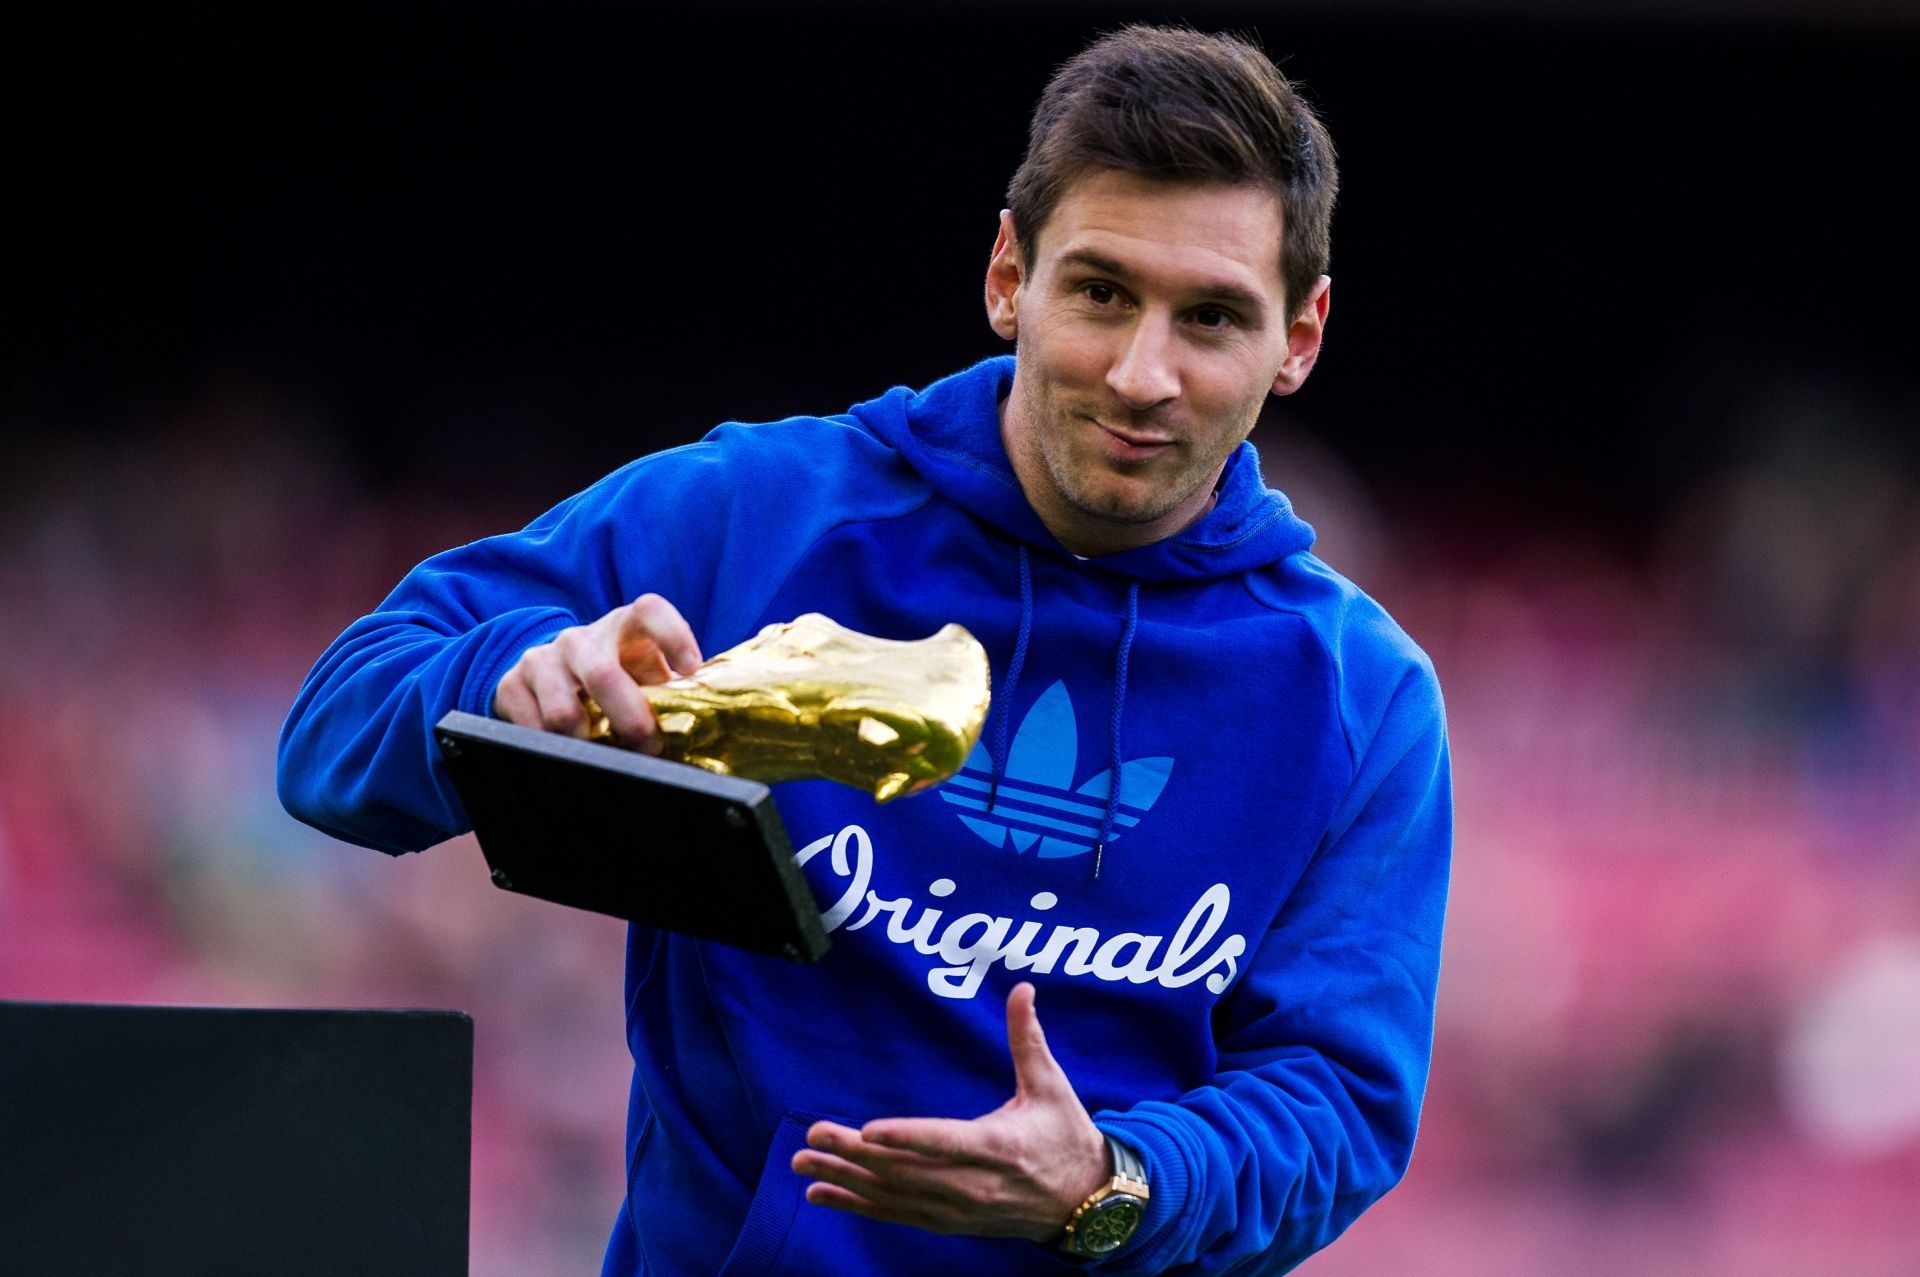 Lionel Messi has won the European Golden Boot more times than any other player in history